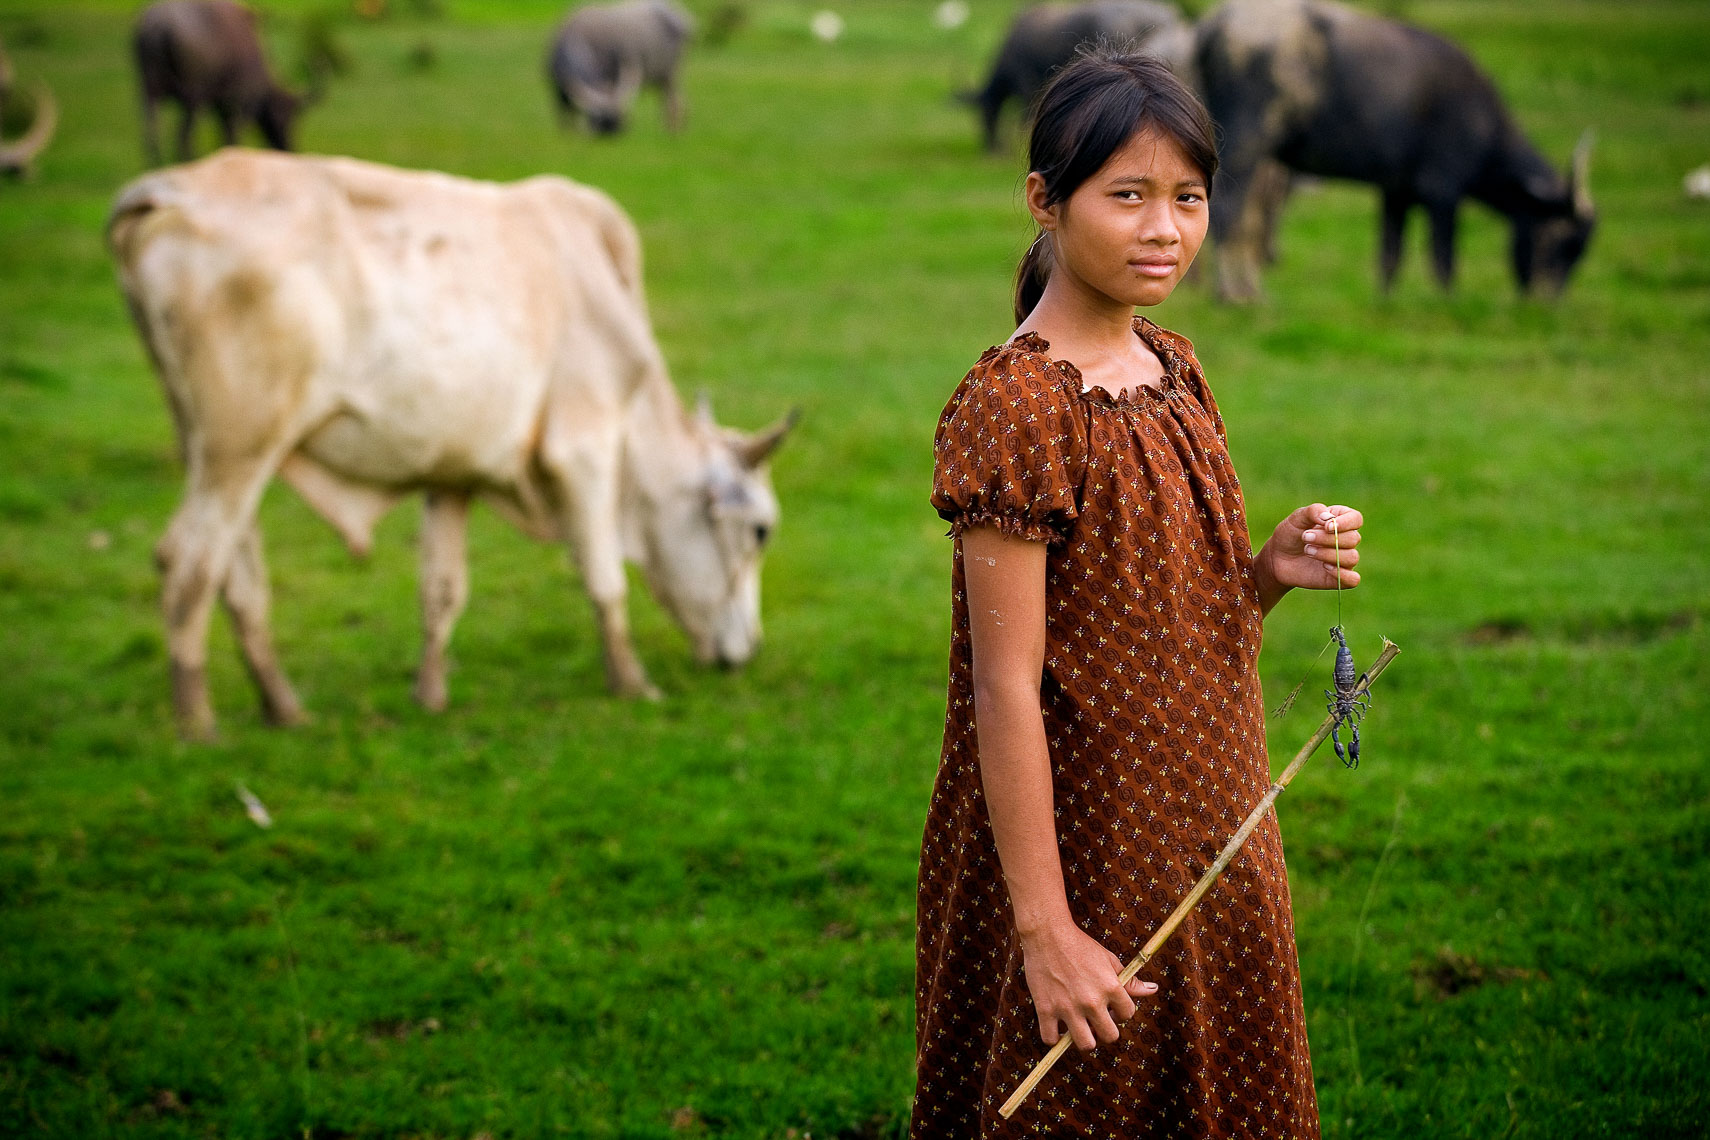 young burmese girl tends to cows and horses on farm in burma myanmar